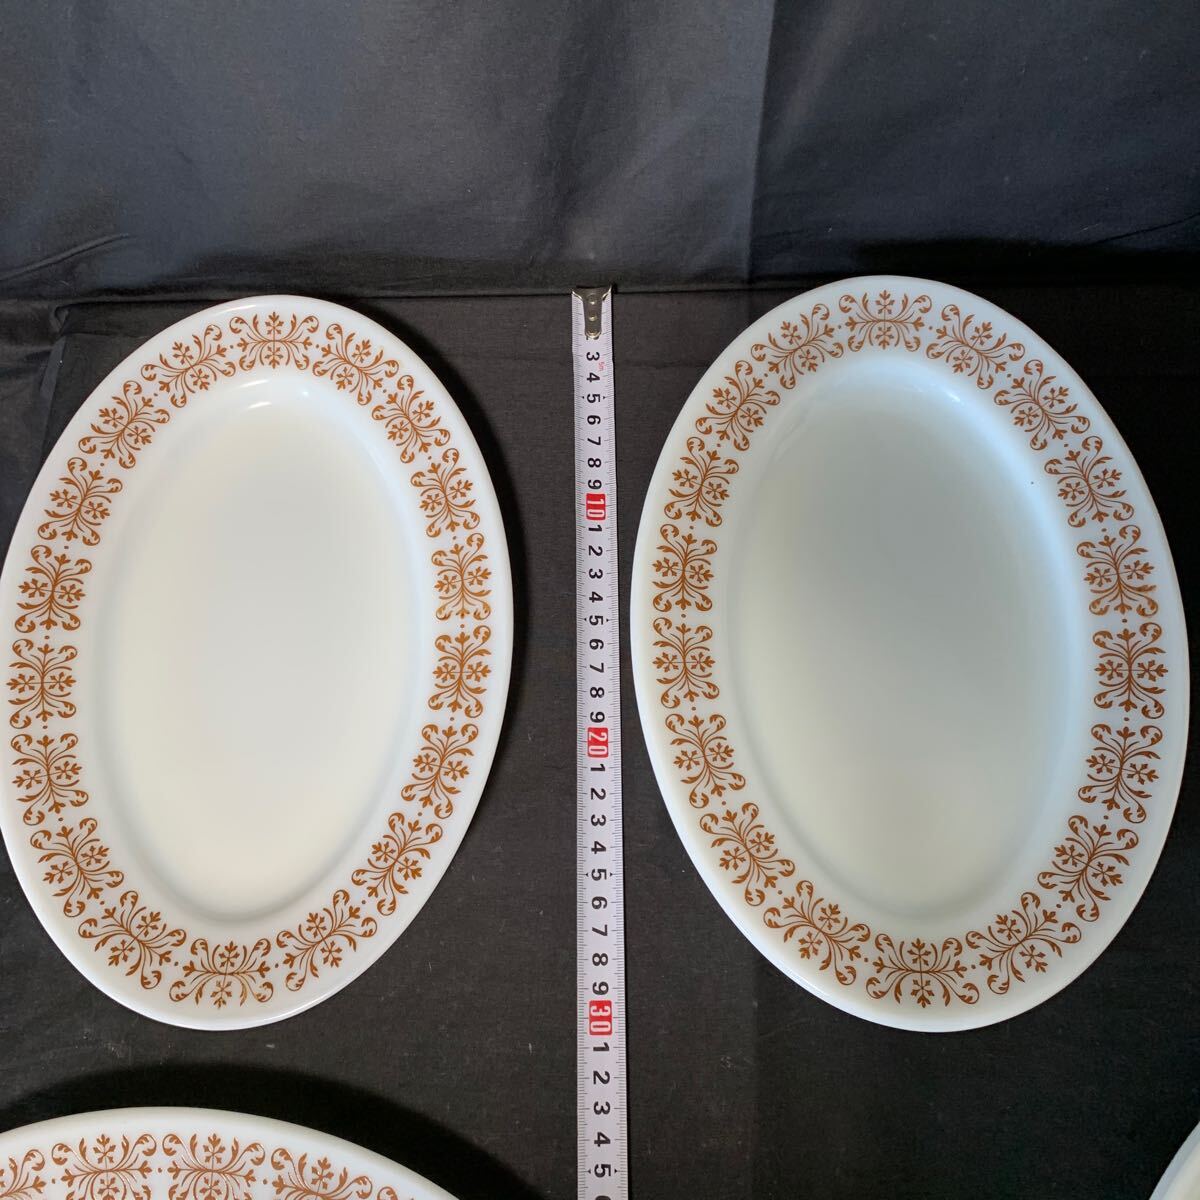 PYREX Pyrex plate 7 sheets summarize 2 size copper fili Gree oval plate . plate America Vintage tableware 